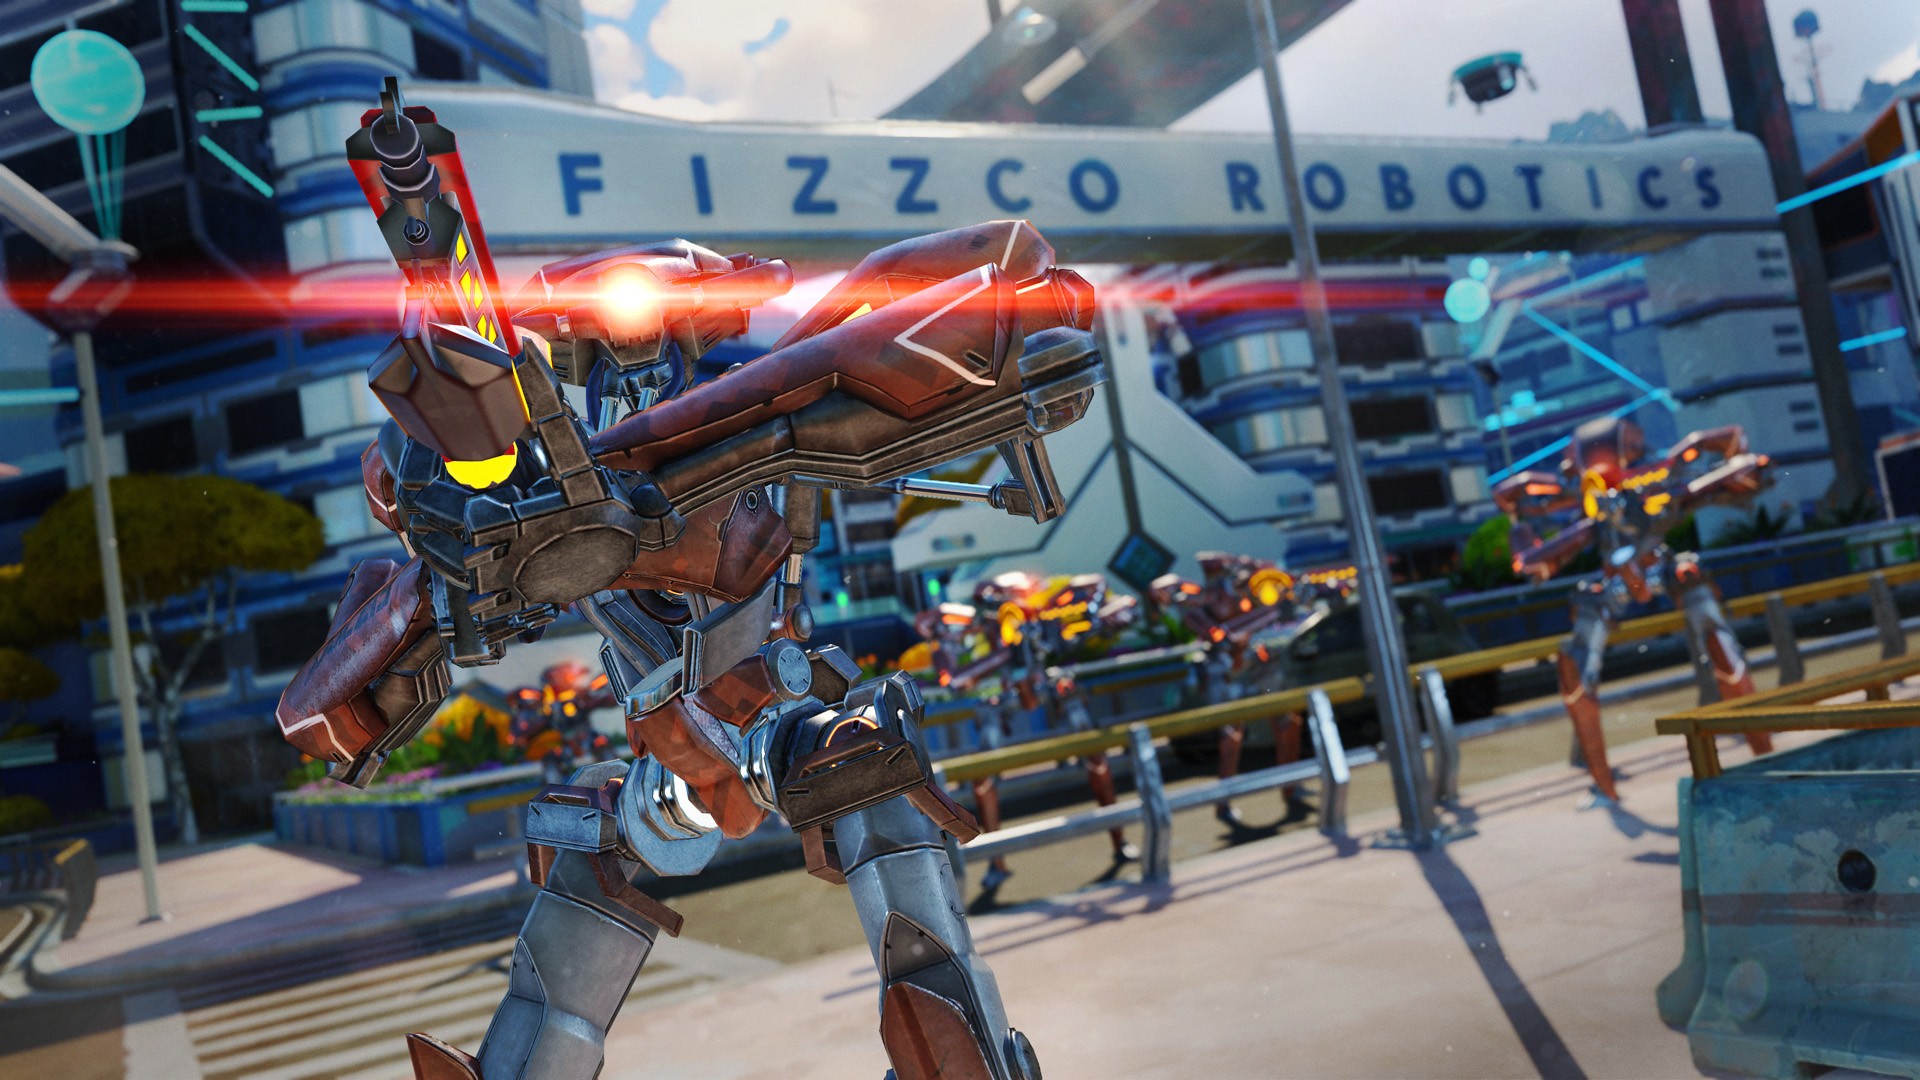 Gallery Image - Sunset Overdrive Fizzco Rifle Bot , HD Wallpaper & Backgrounds